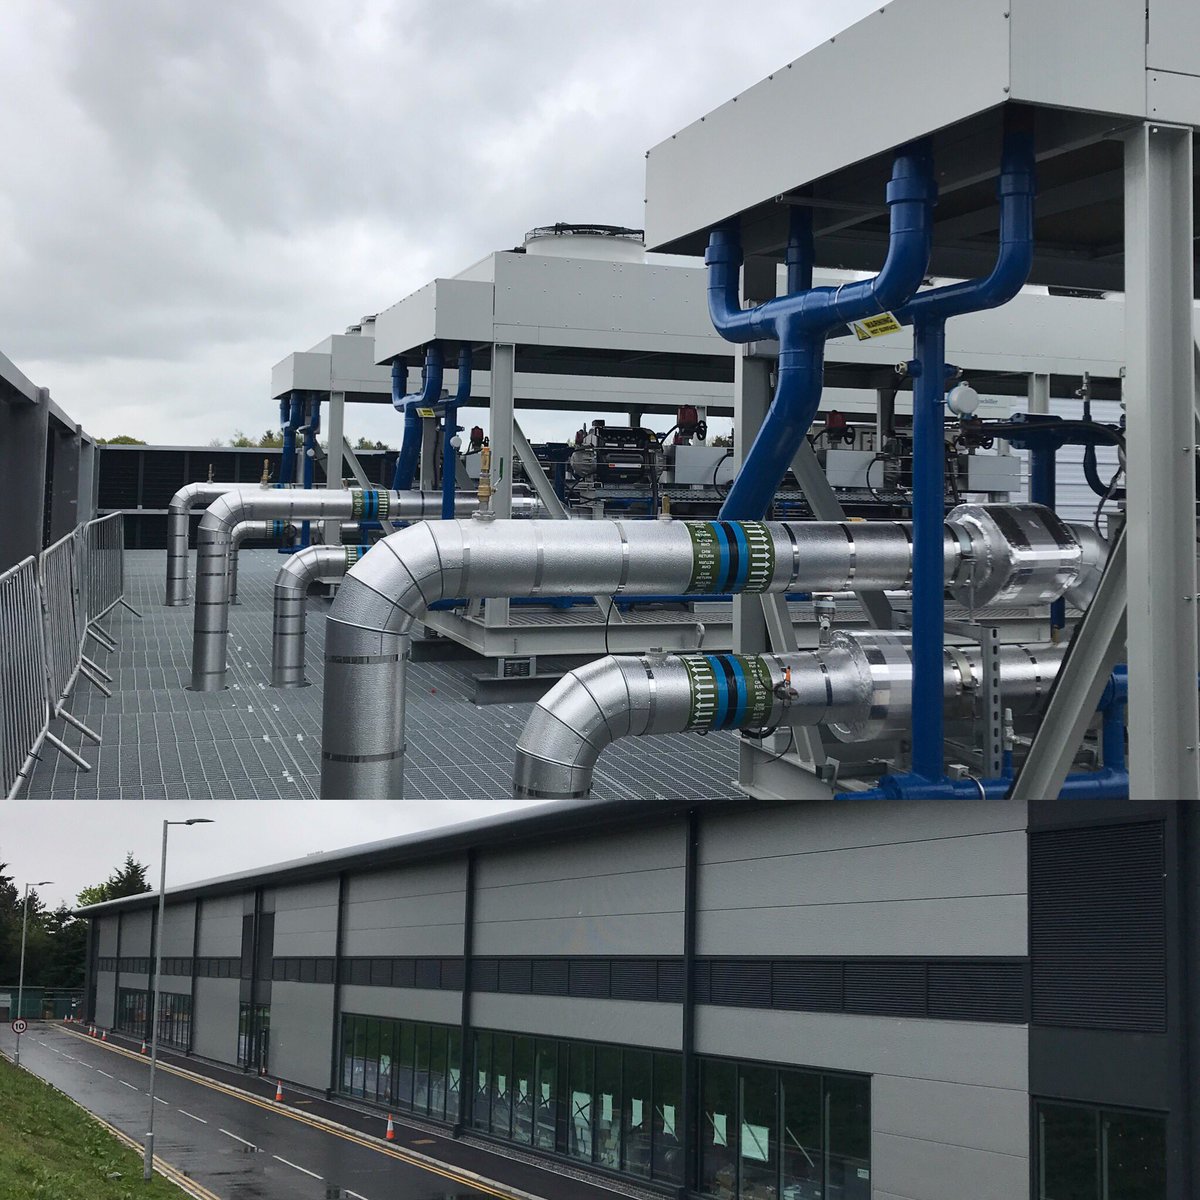 Superb visit to our #Pharmaceutical Project in County Durham. An Examplar scheme in every aspect #Collaboration #ZeroHarm #Innovation #Embracingtechnology Well done Steve Cryer and the team @Engineering_SES